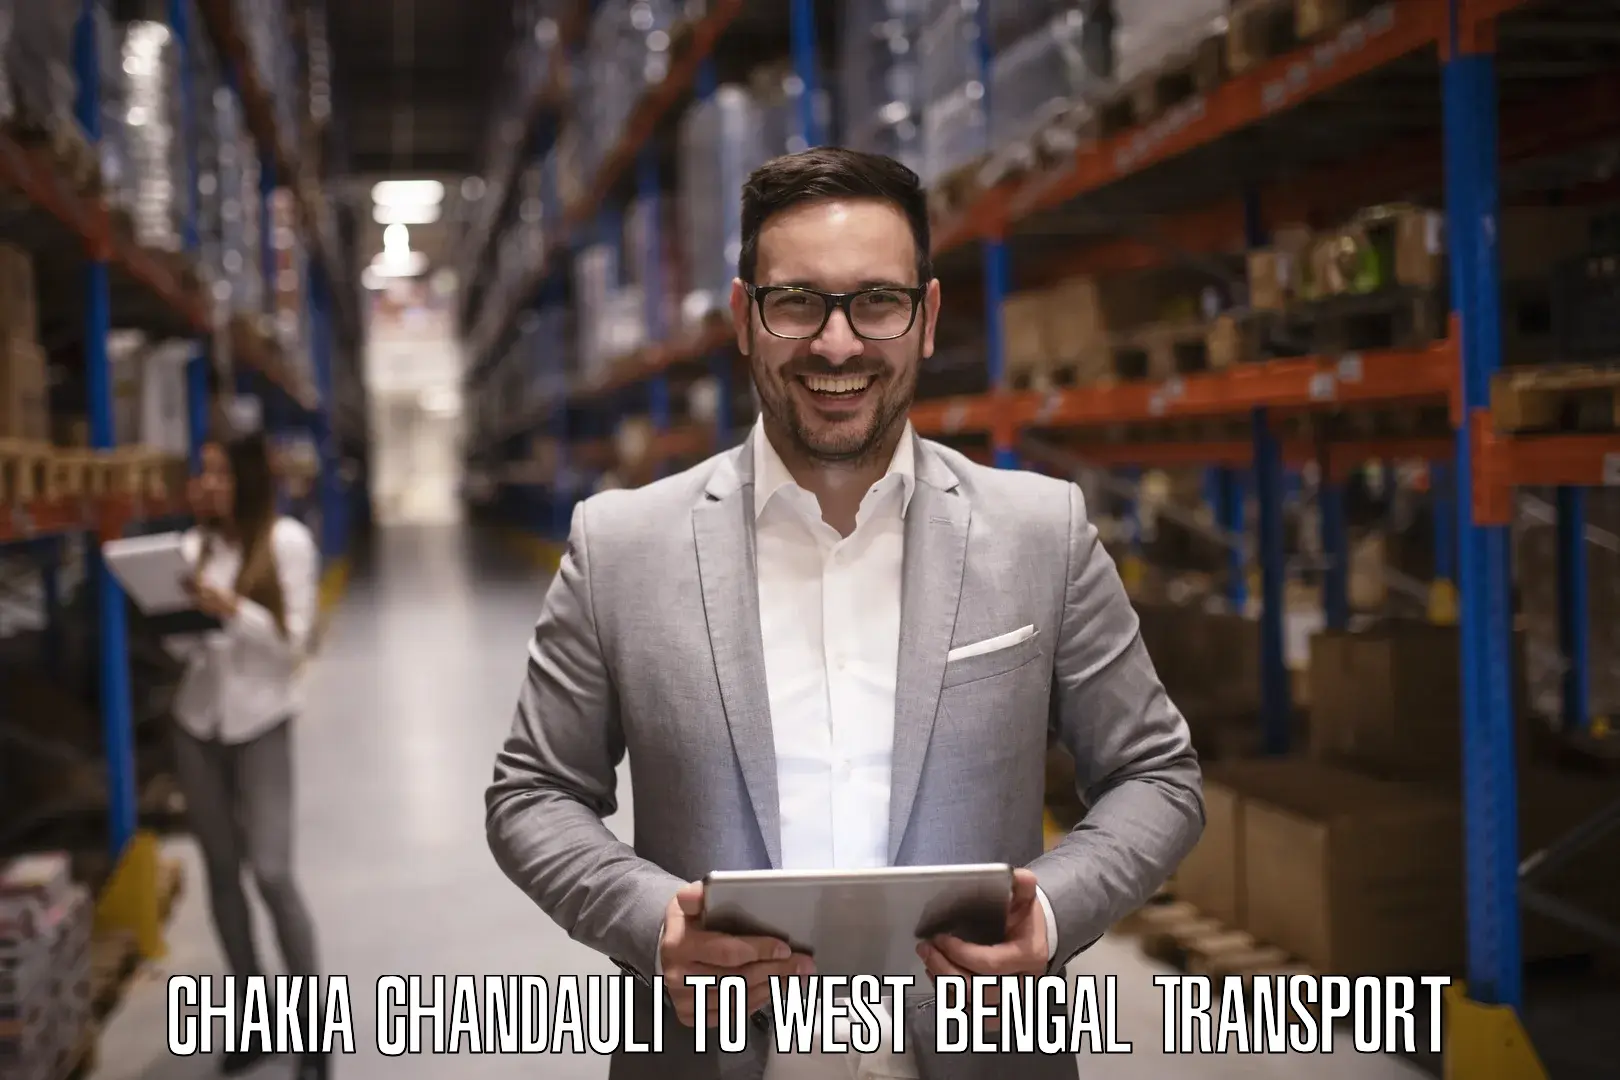 Road transport online services Chakia Chandauli to West Bengal